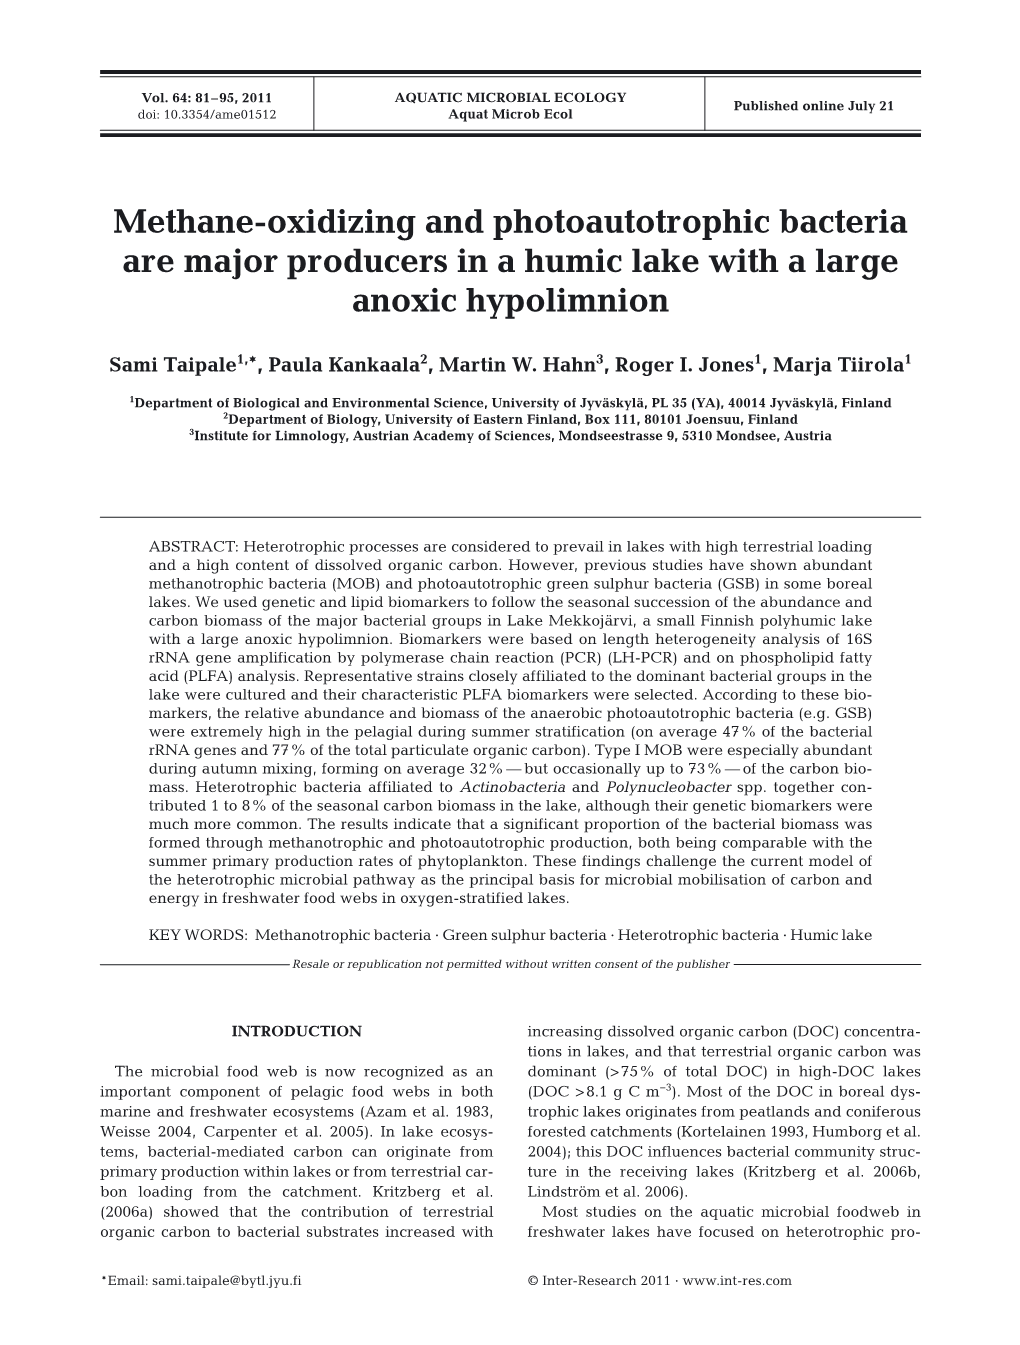 Methane-Oxidizing and Photoautotrophic Bacteria Are Major Producers in a Humic Lake with a Large Anoxic Hypolimnion